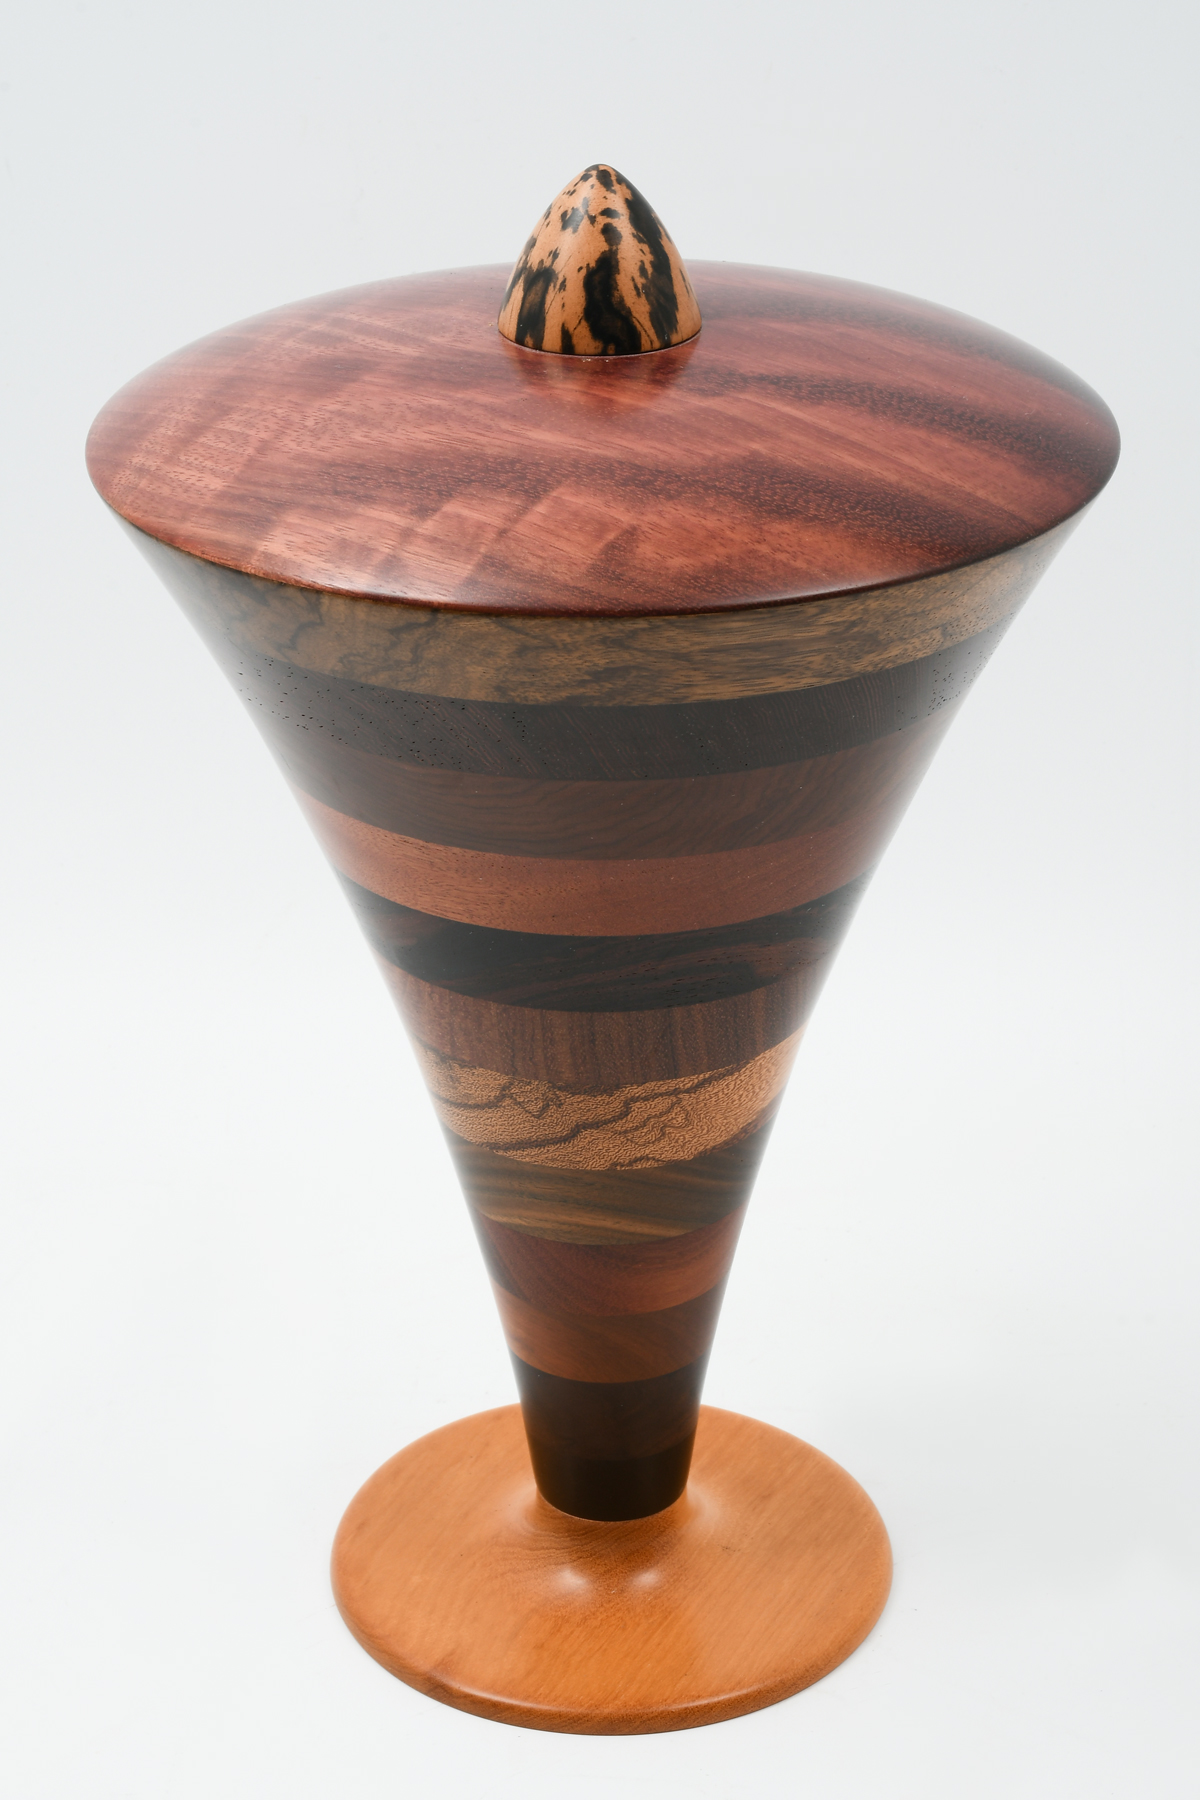 L. CHENEY MIXED EXOTIC TURNED WOOD